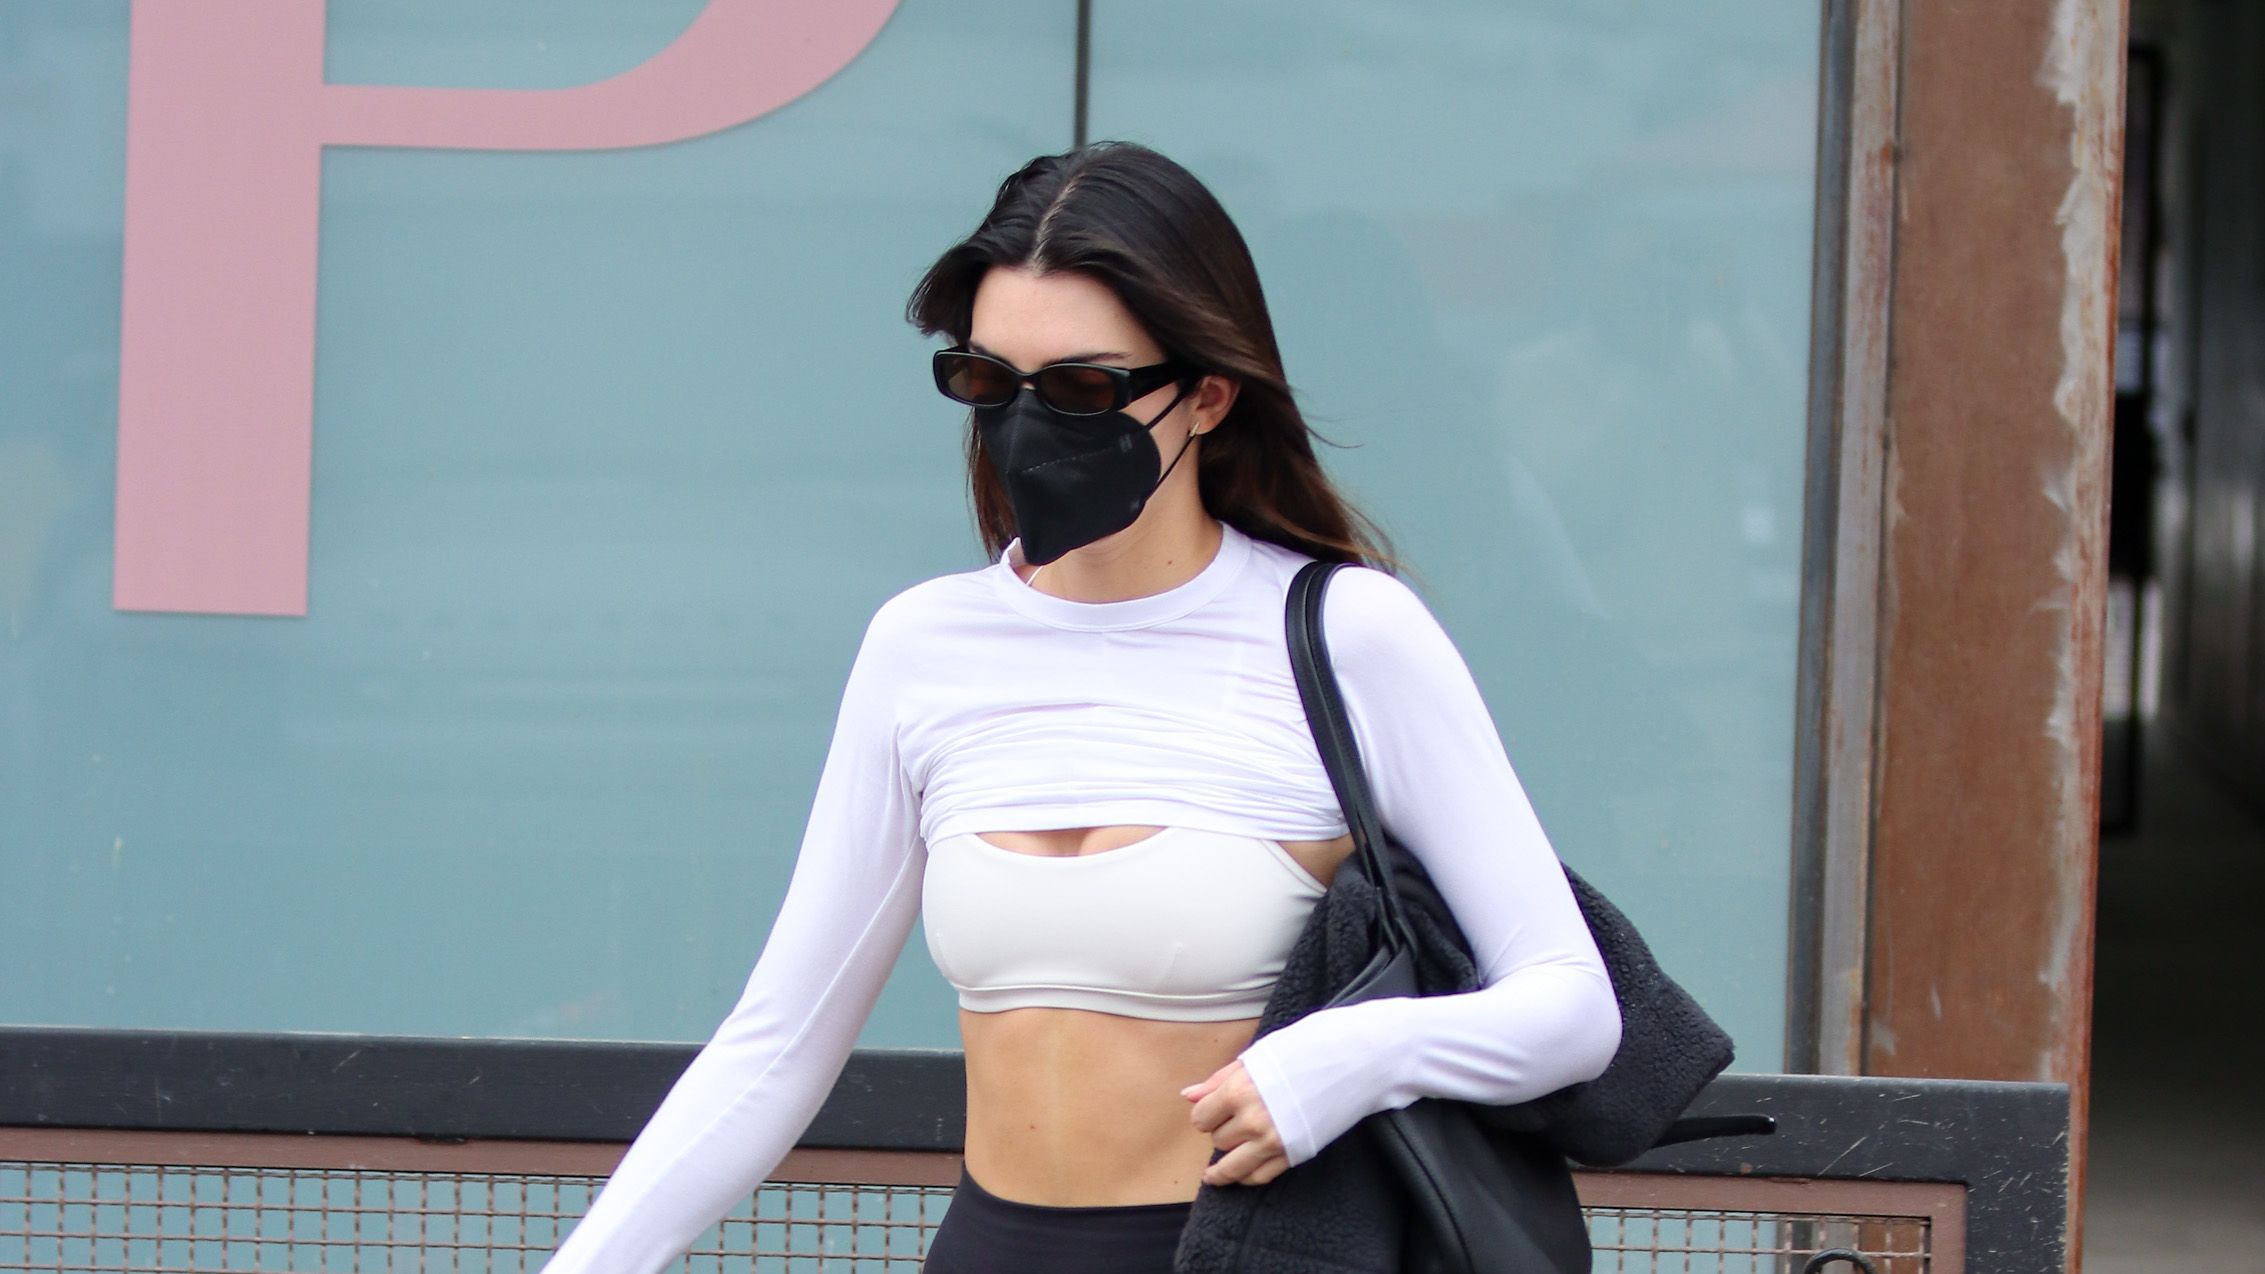 Kendall Jenner Gets In a Workout at Afternoon Pilates Class: Photo